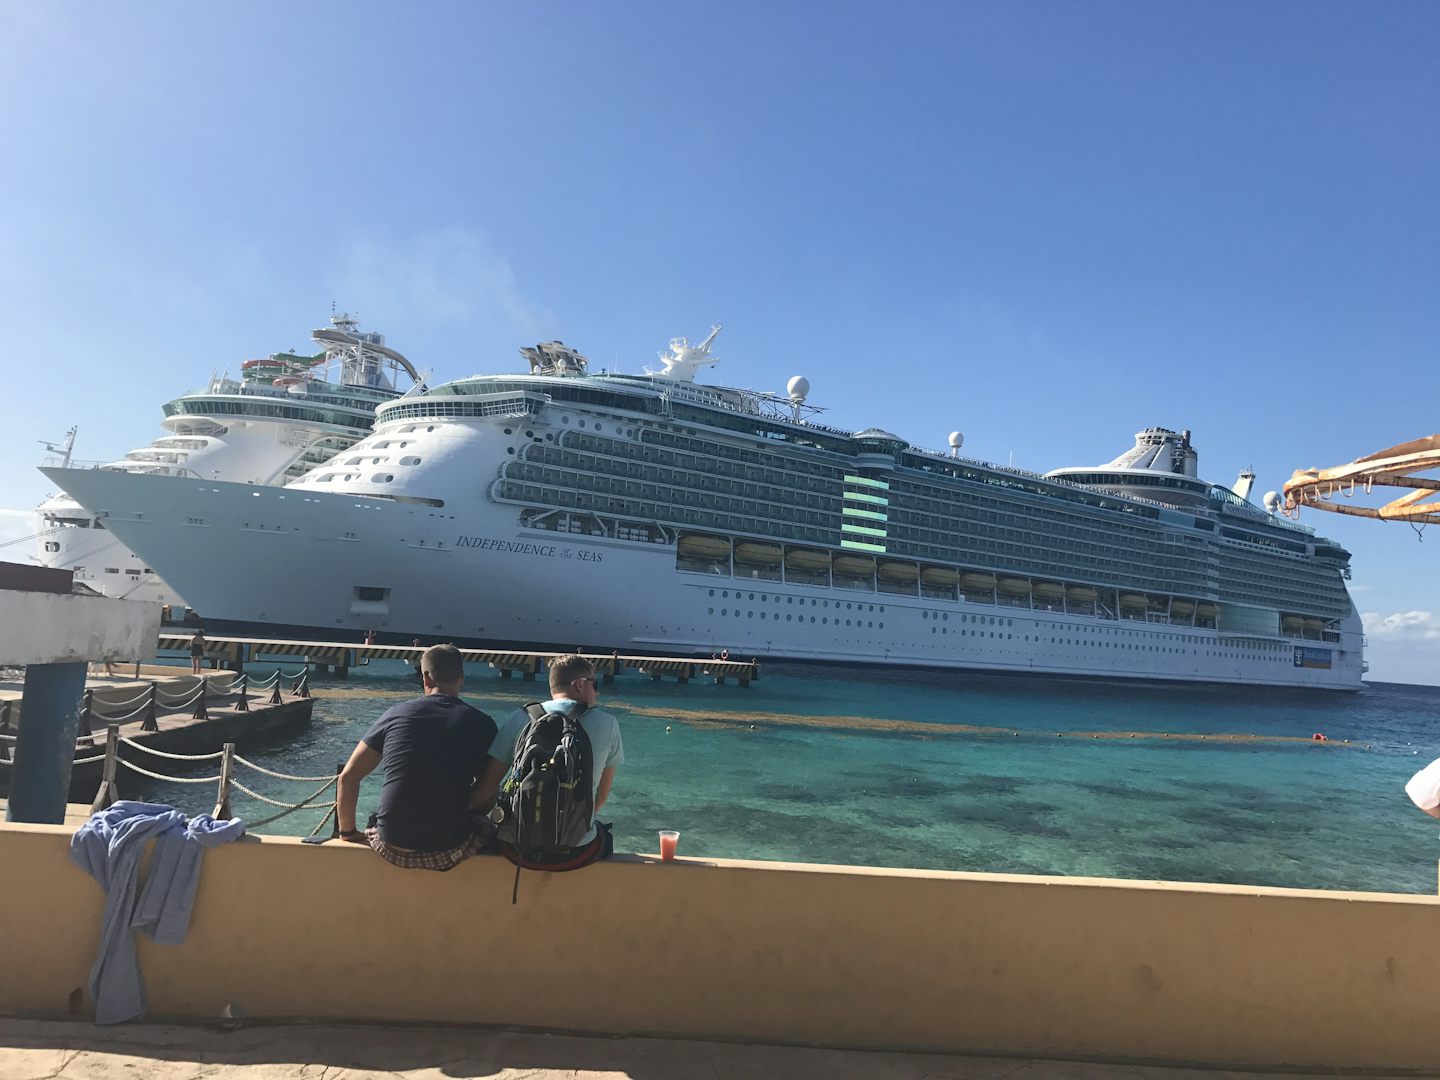 Independence of the seas in Cozumel